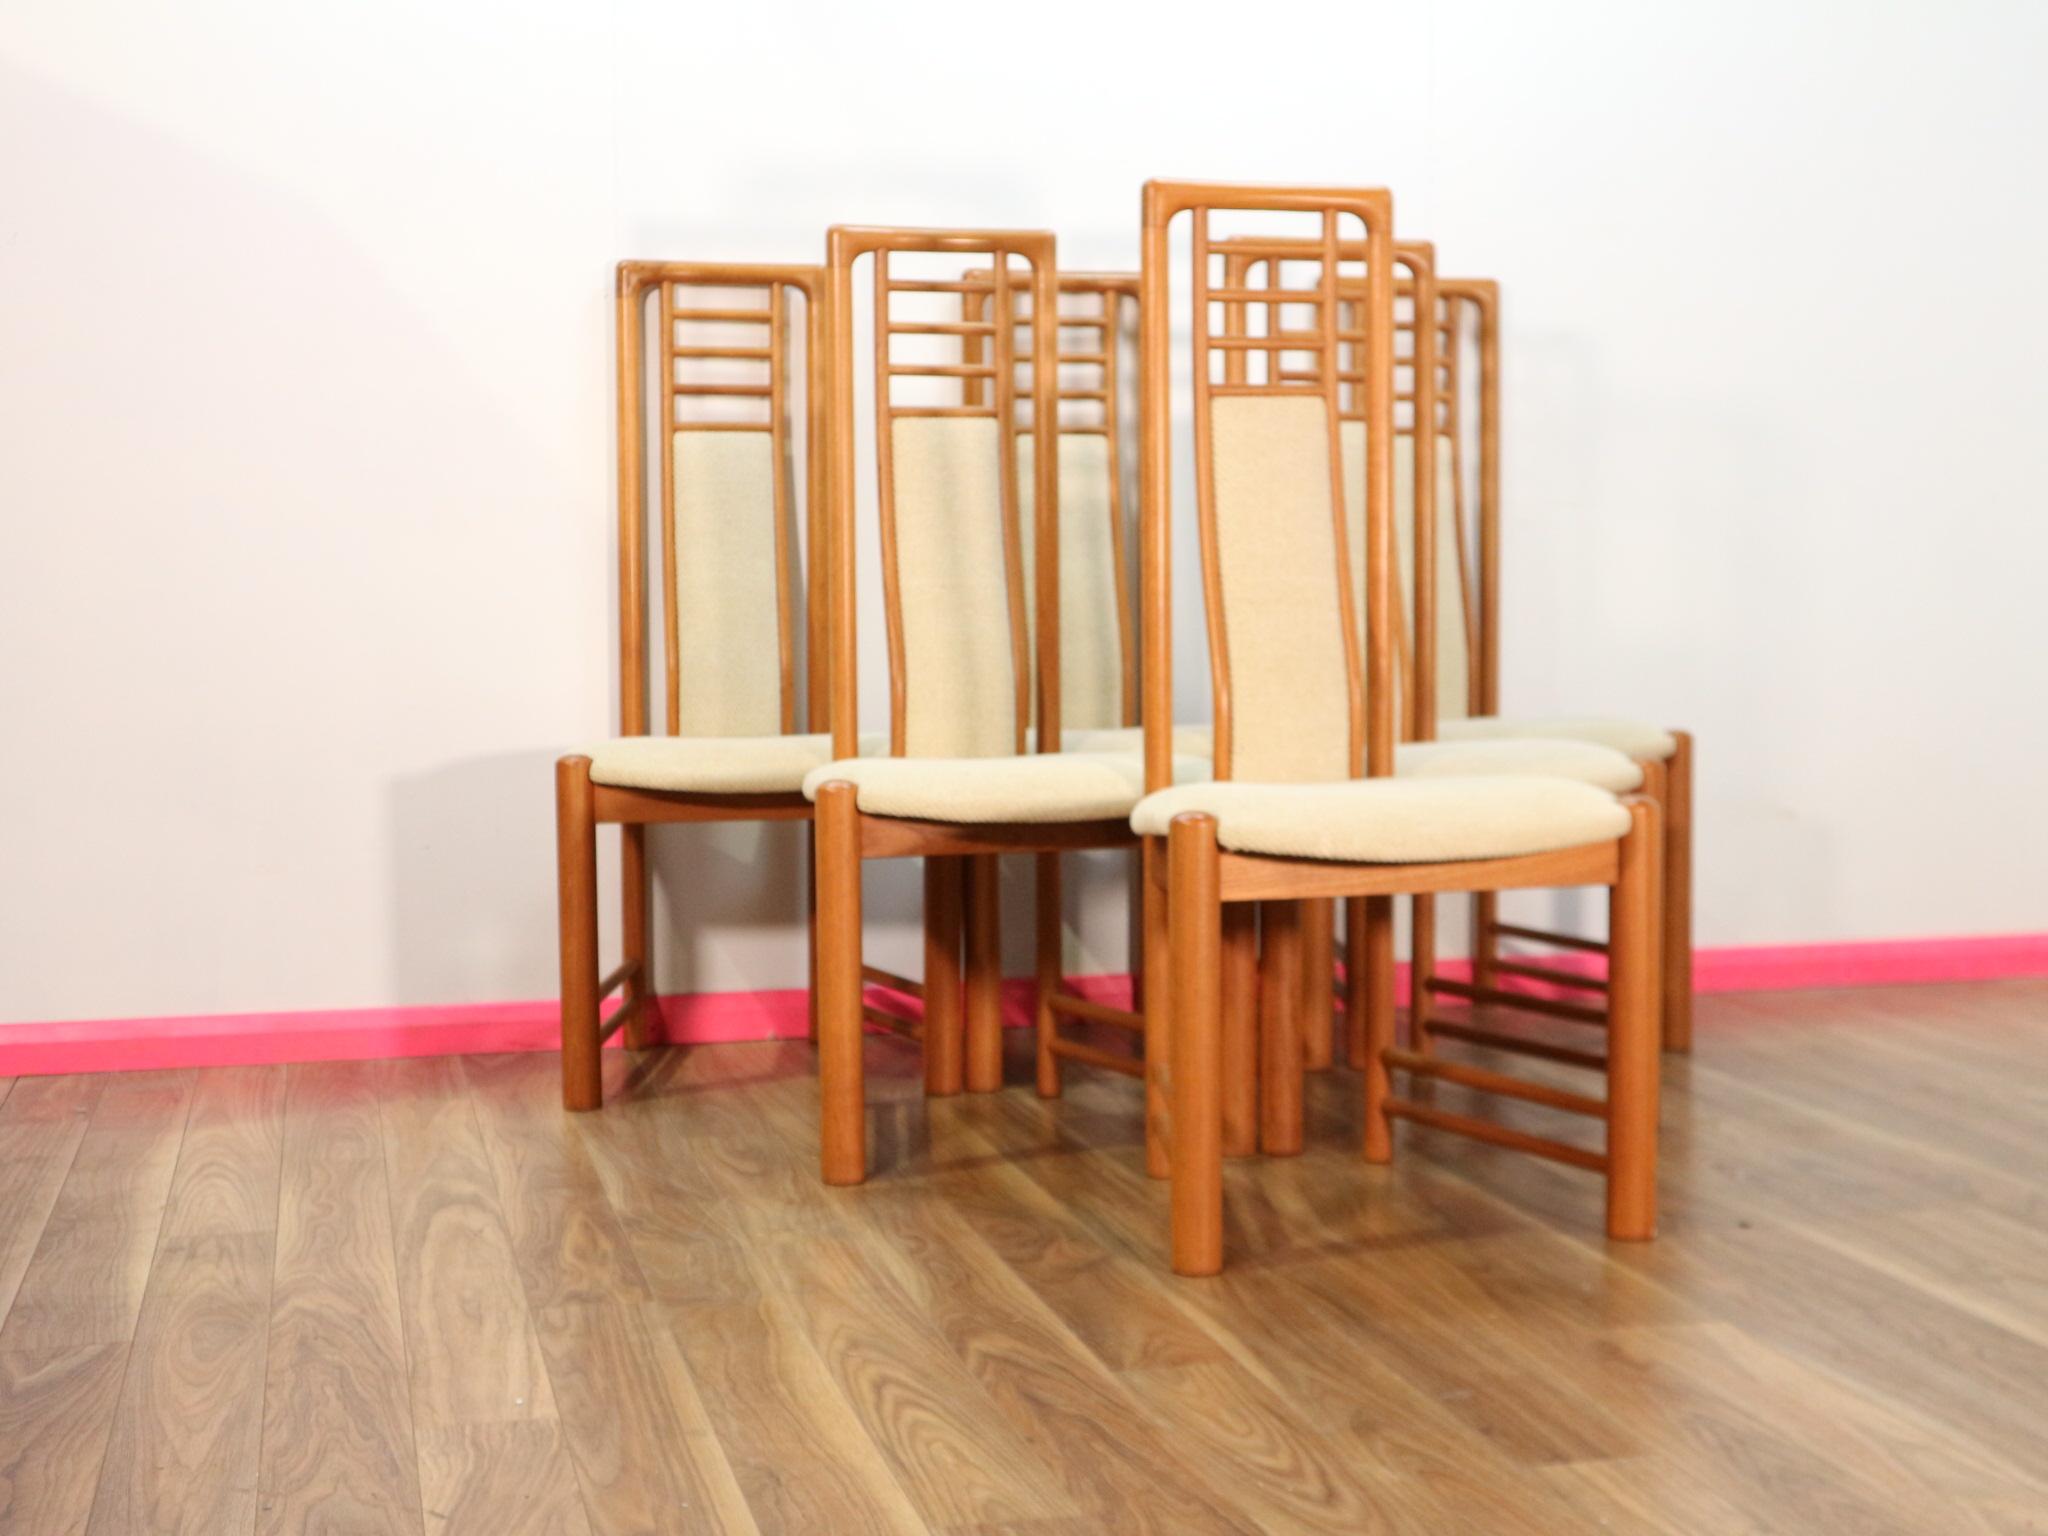 This set of Danish dining chairs are a true statement piece. With their high backs and great shape they really stand out from the crowd and are a great example of Danish design and build quality with a gorgeous grain within the wood frames.